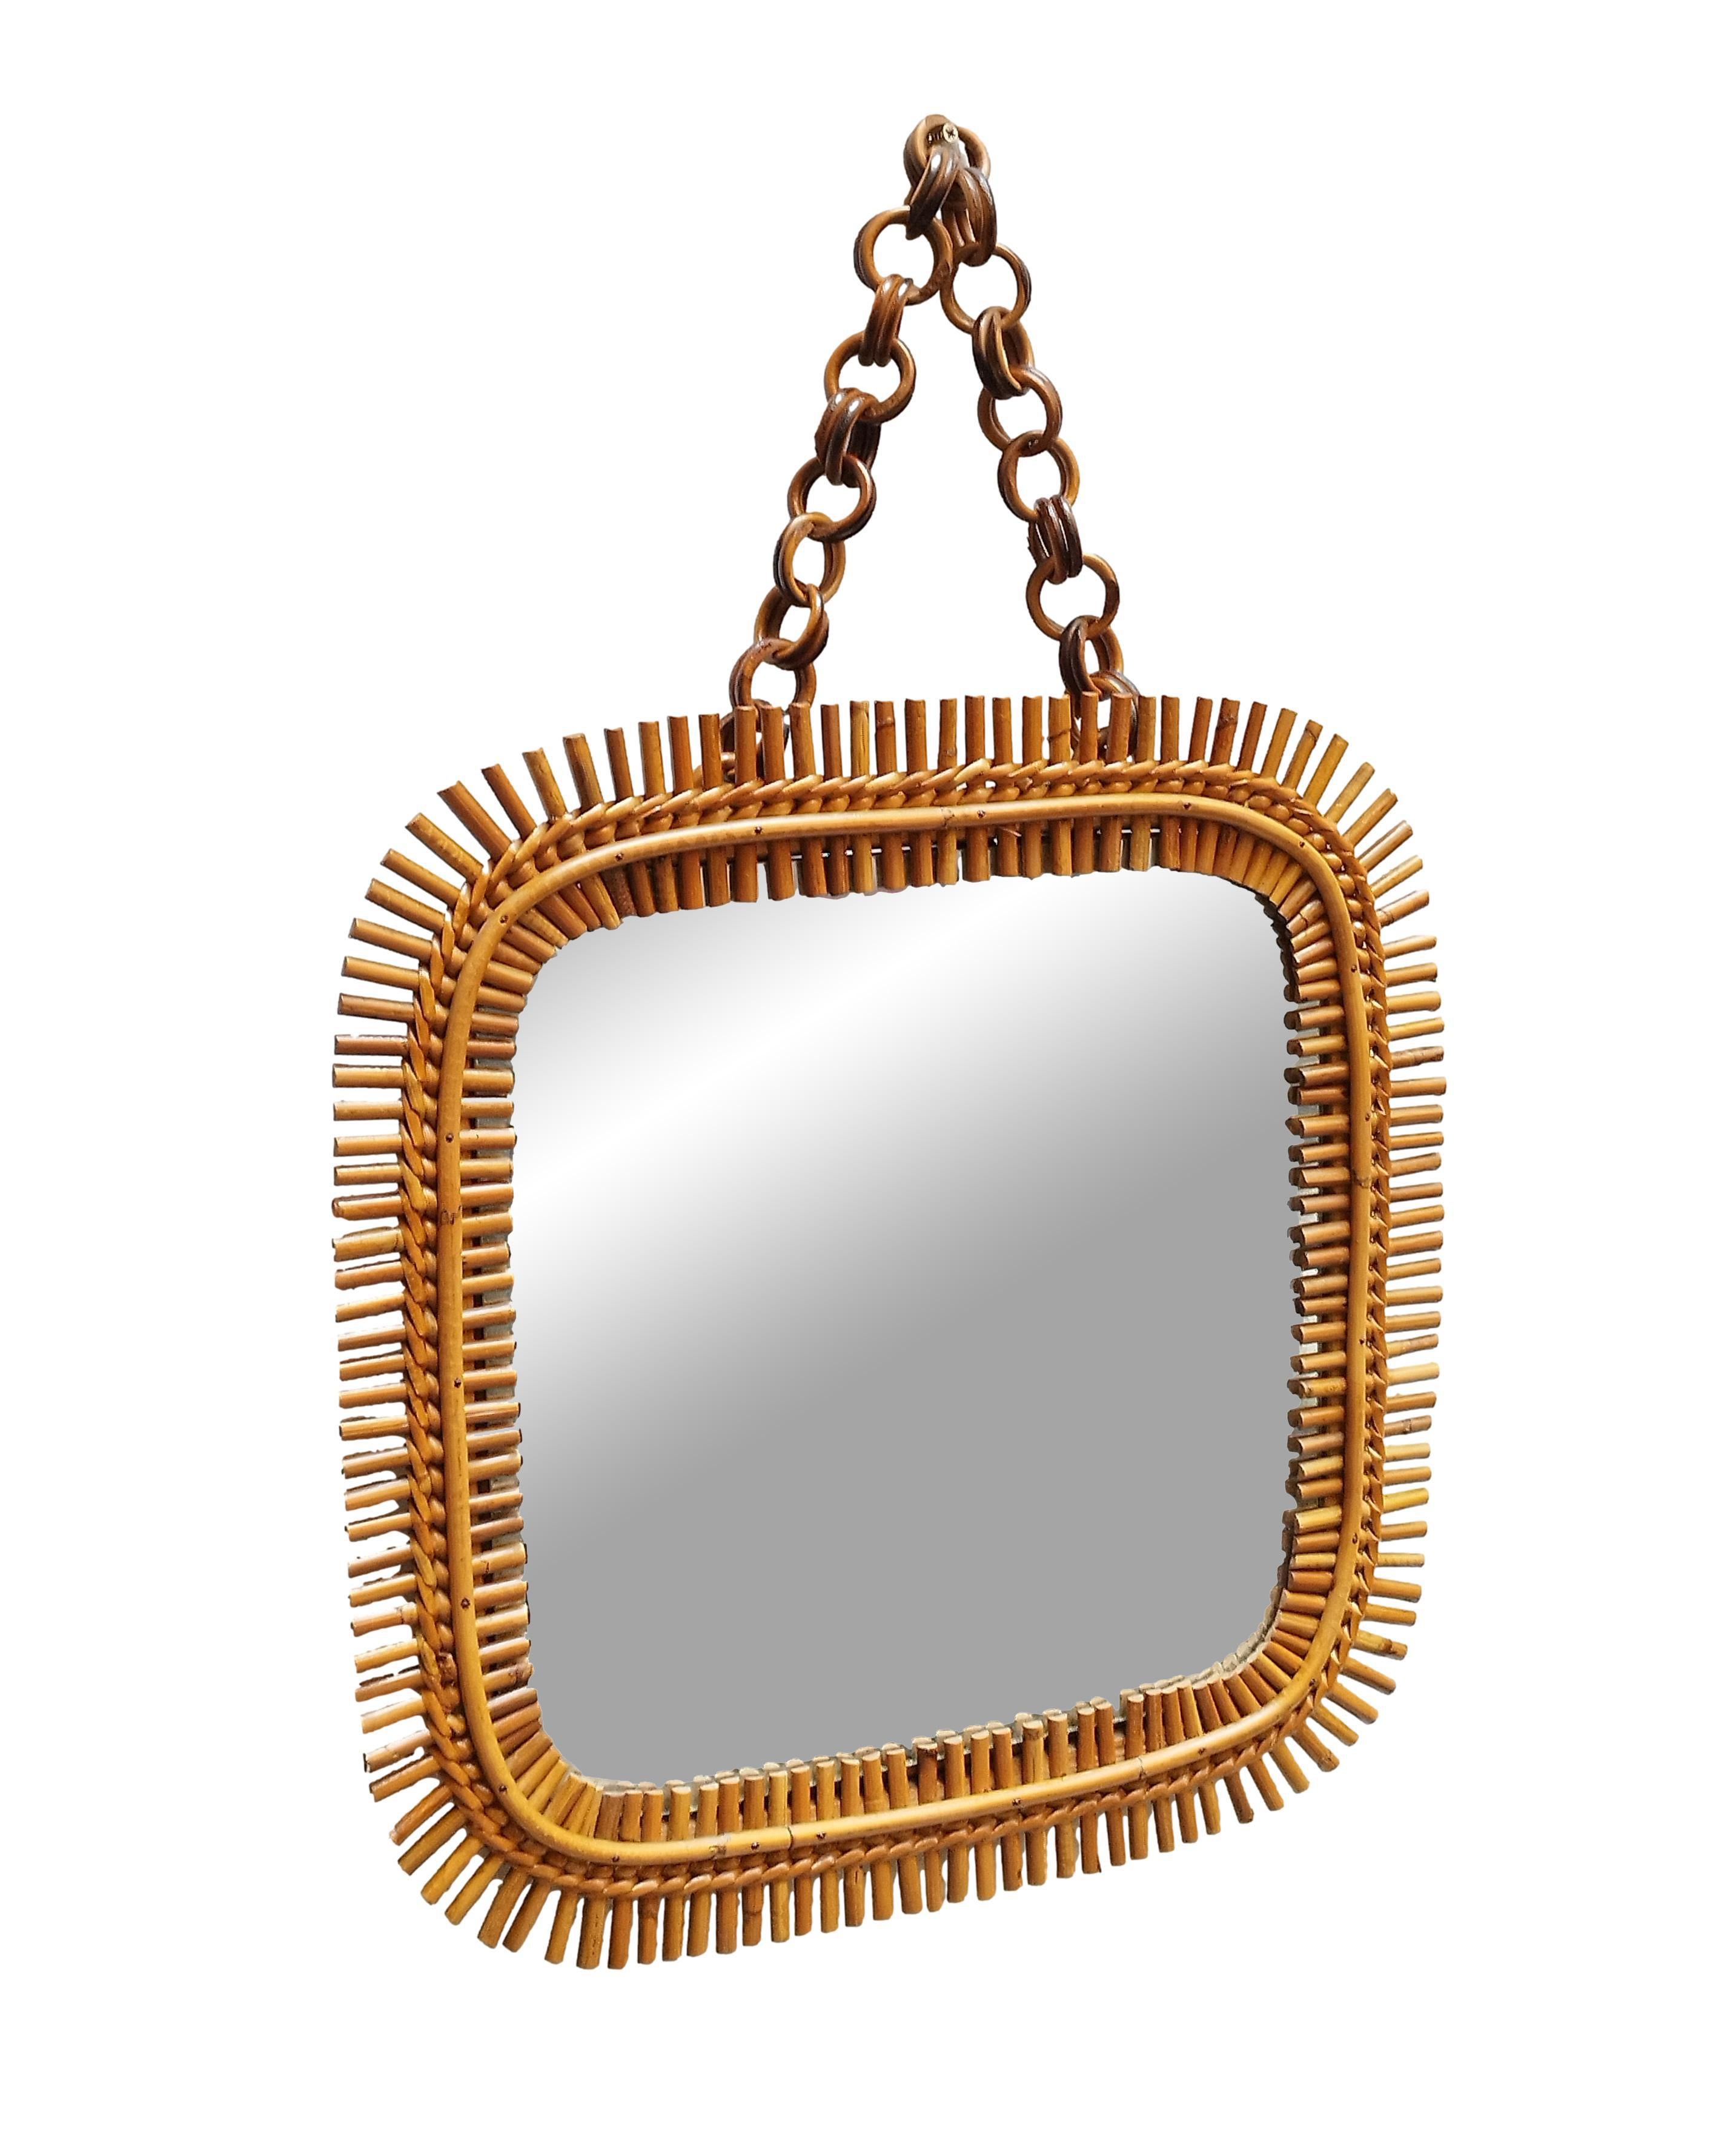 Quadrangular mirror made in Italy in the 1960s.
The mirror is original of the period, in fact it shows slight signs of oxidation. Thin strips of rush, all different from each other, are bound together with rattan to form a sunburst.
The mirror is